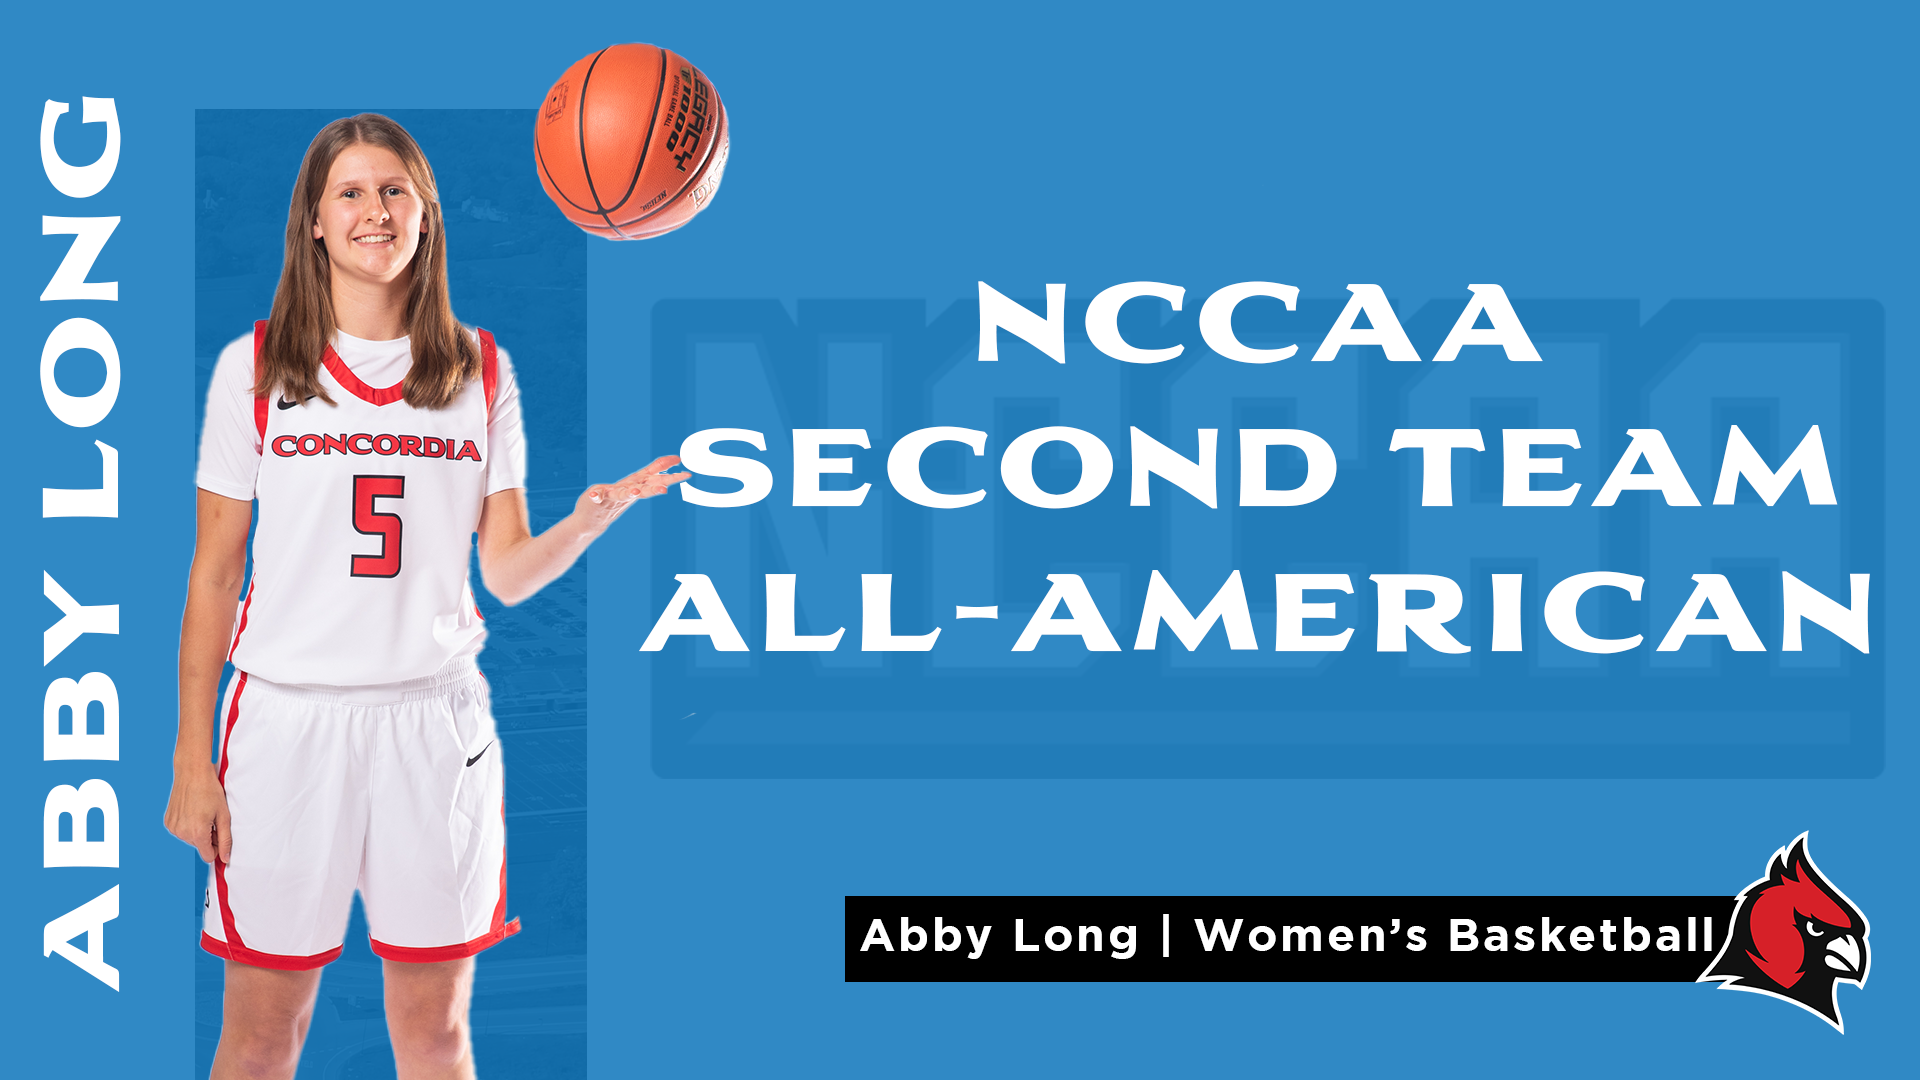 Abby Long named NCCAA Second Team All-American